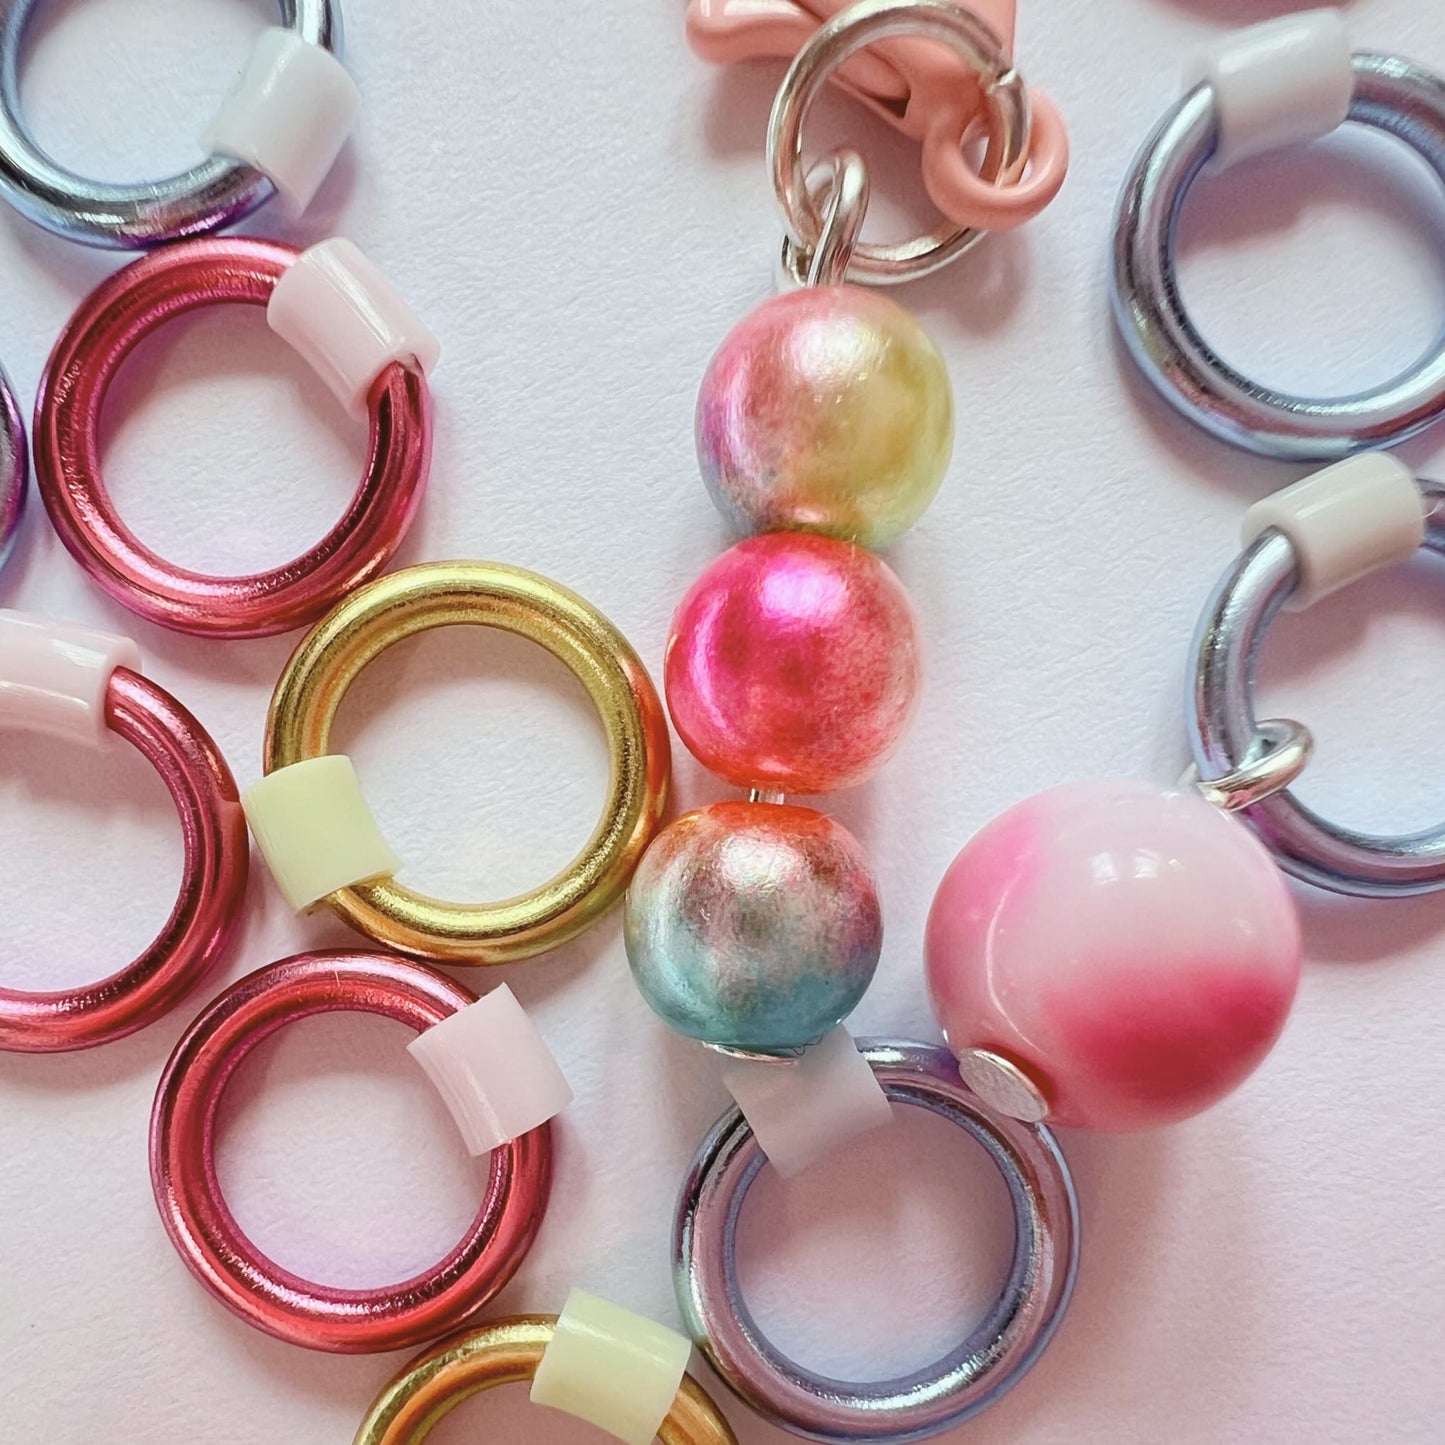 Pastel Ice Cream inspired Knitting Stitch Markers for Sock, Lace & Knitting - Snag Free in 3 Sizes